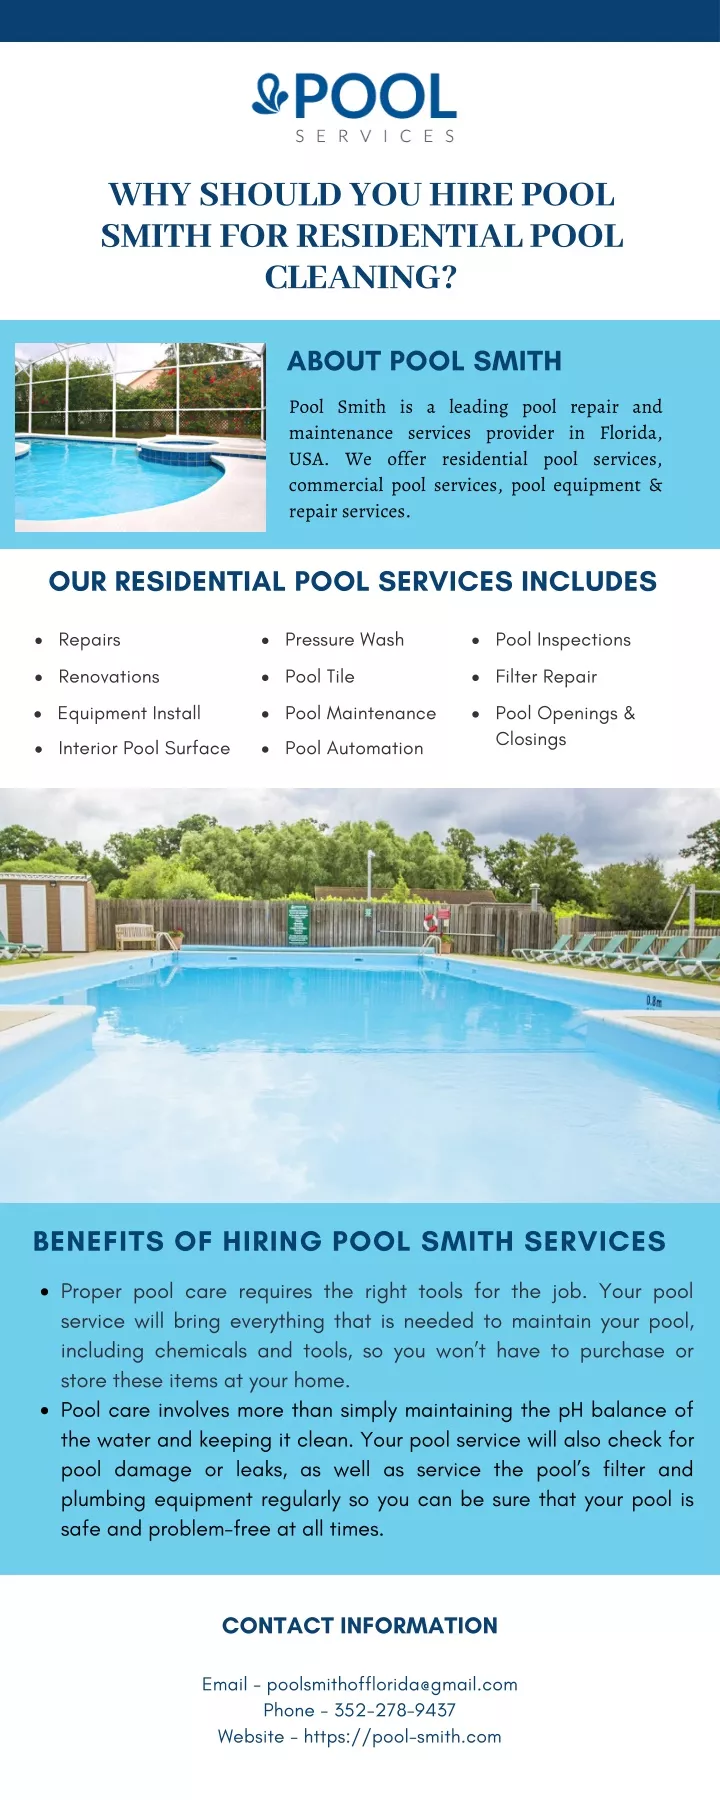 why should you hire pool smith for residential